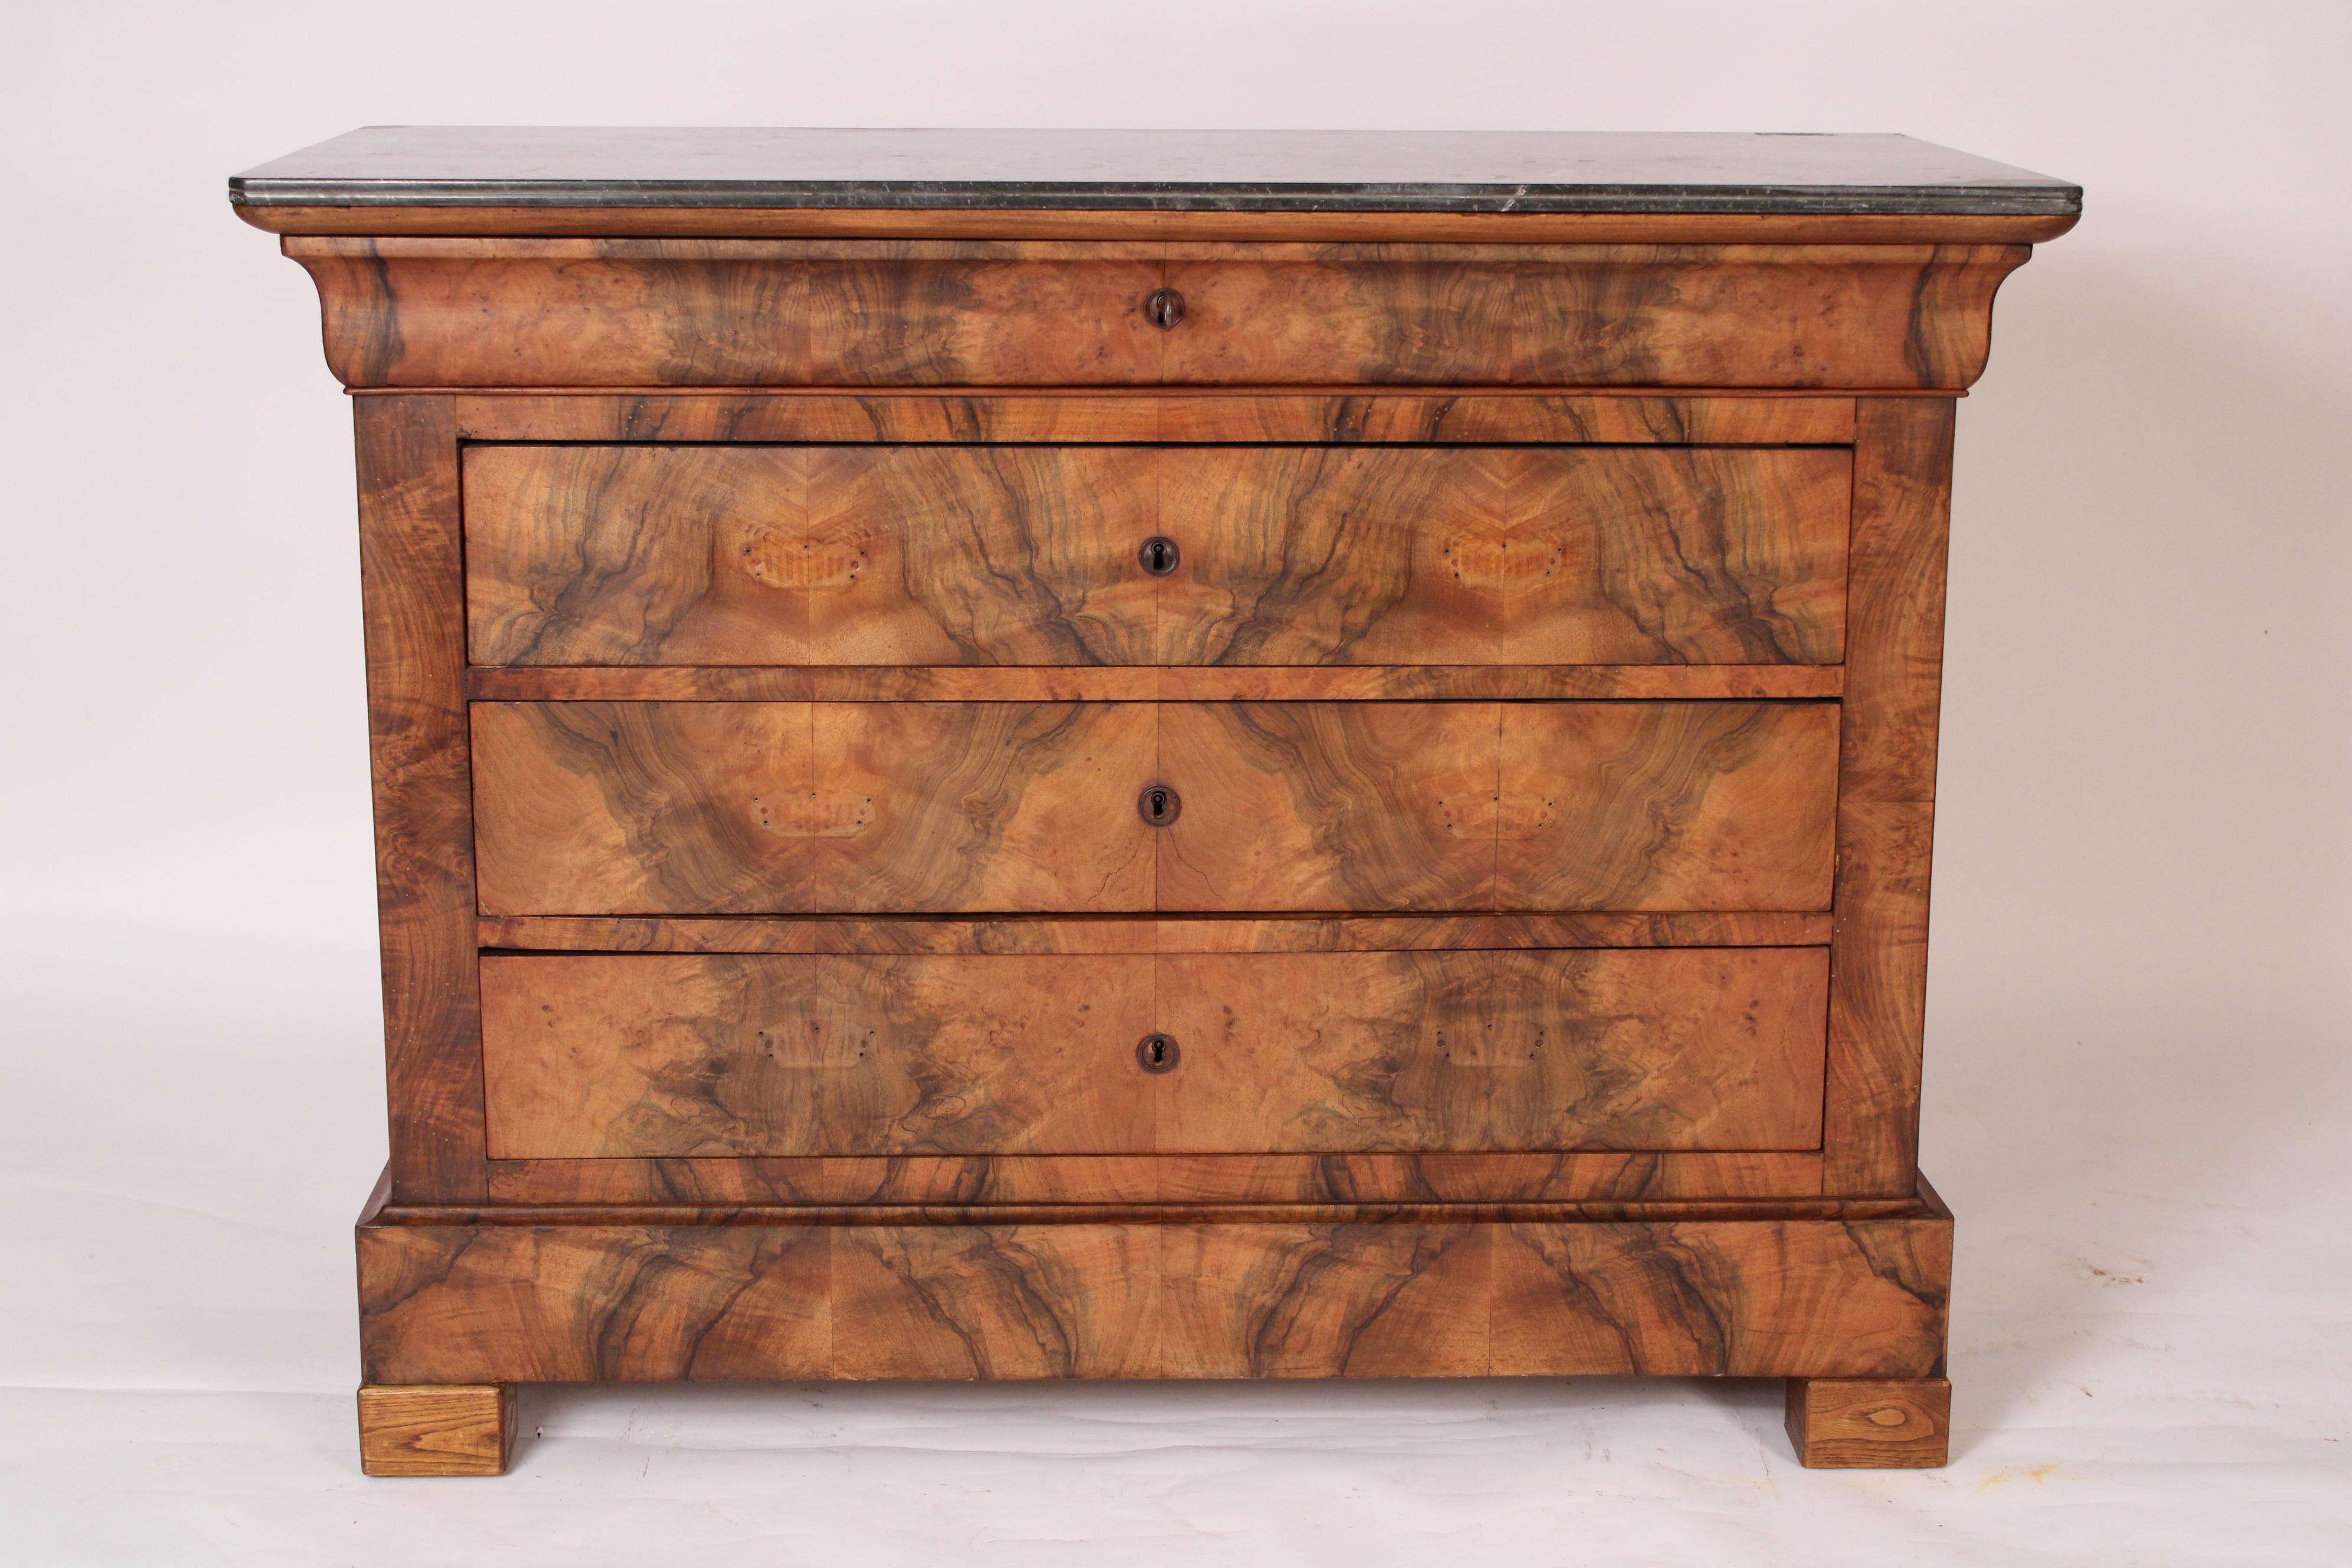 Louis Philippe burl walnut chest of drawers with marble top, mid 19th century. With a rectangular grey and white marble top with rounded corners, front and side edges of marble top scored, an S shaped top drawer and 3 lower drawers all drawers and